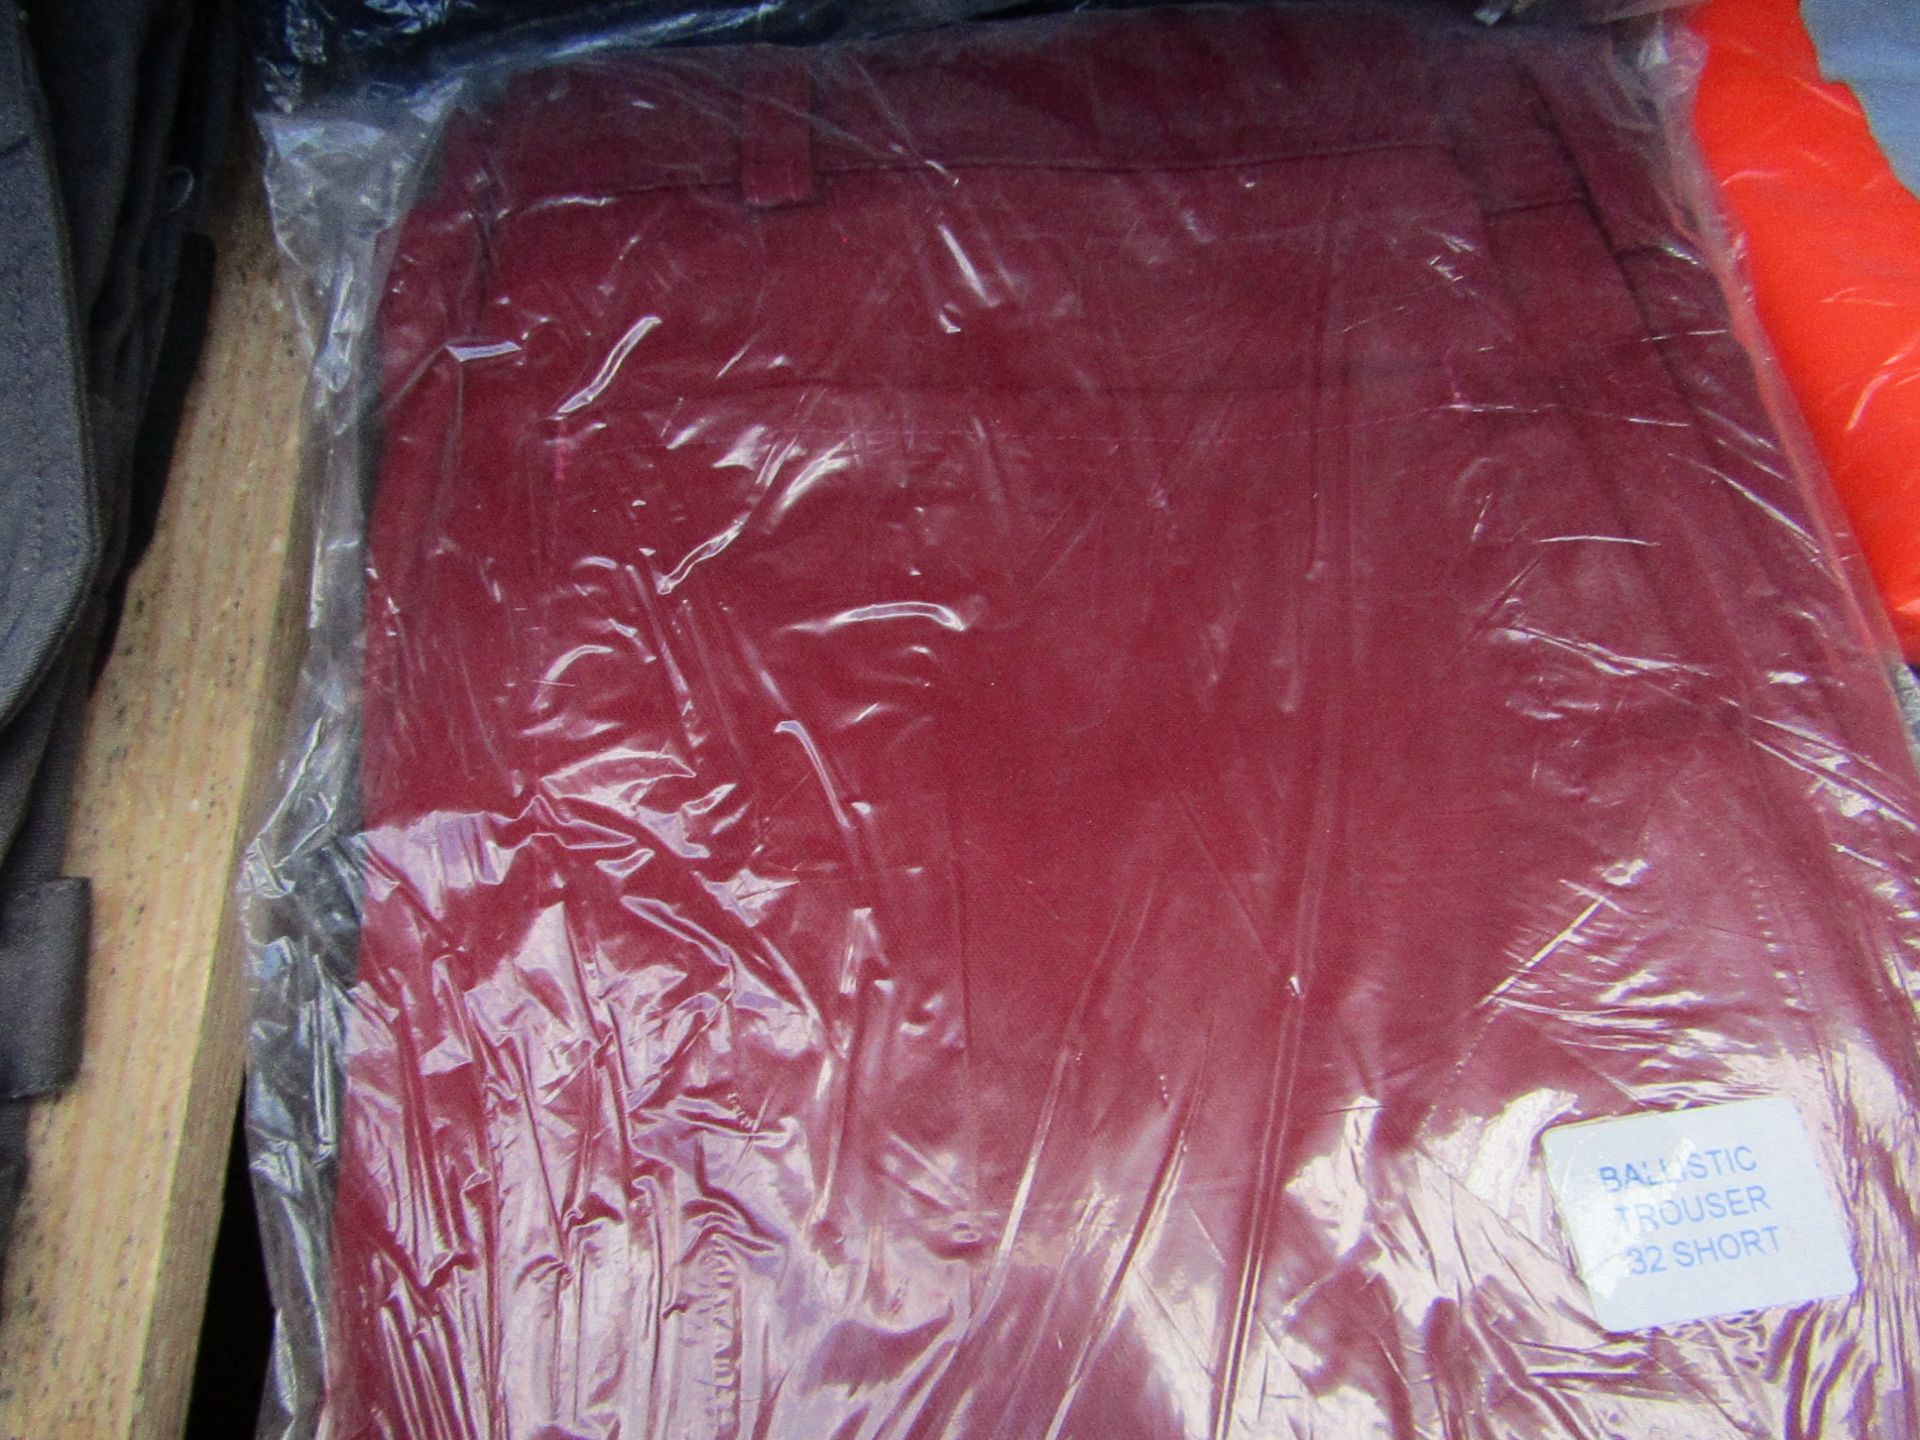 1x Burgundy Ballistic Work Trousers - Size 32 Short - Unused & Packaged.